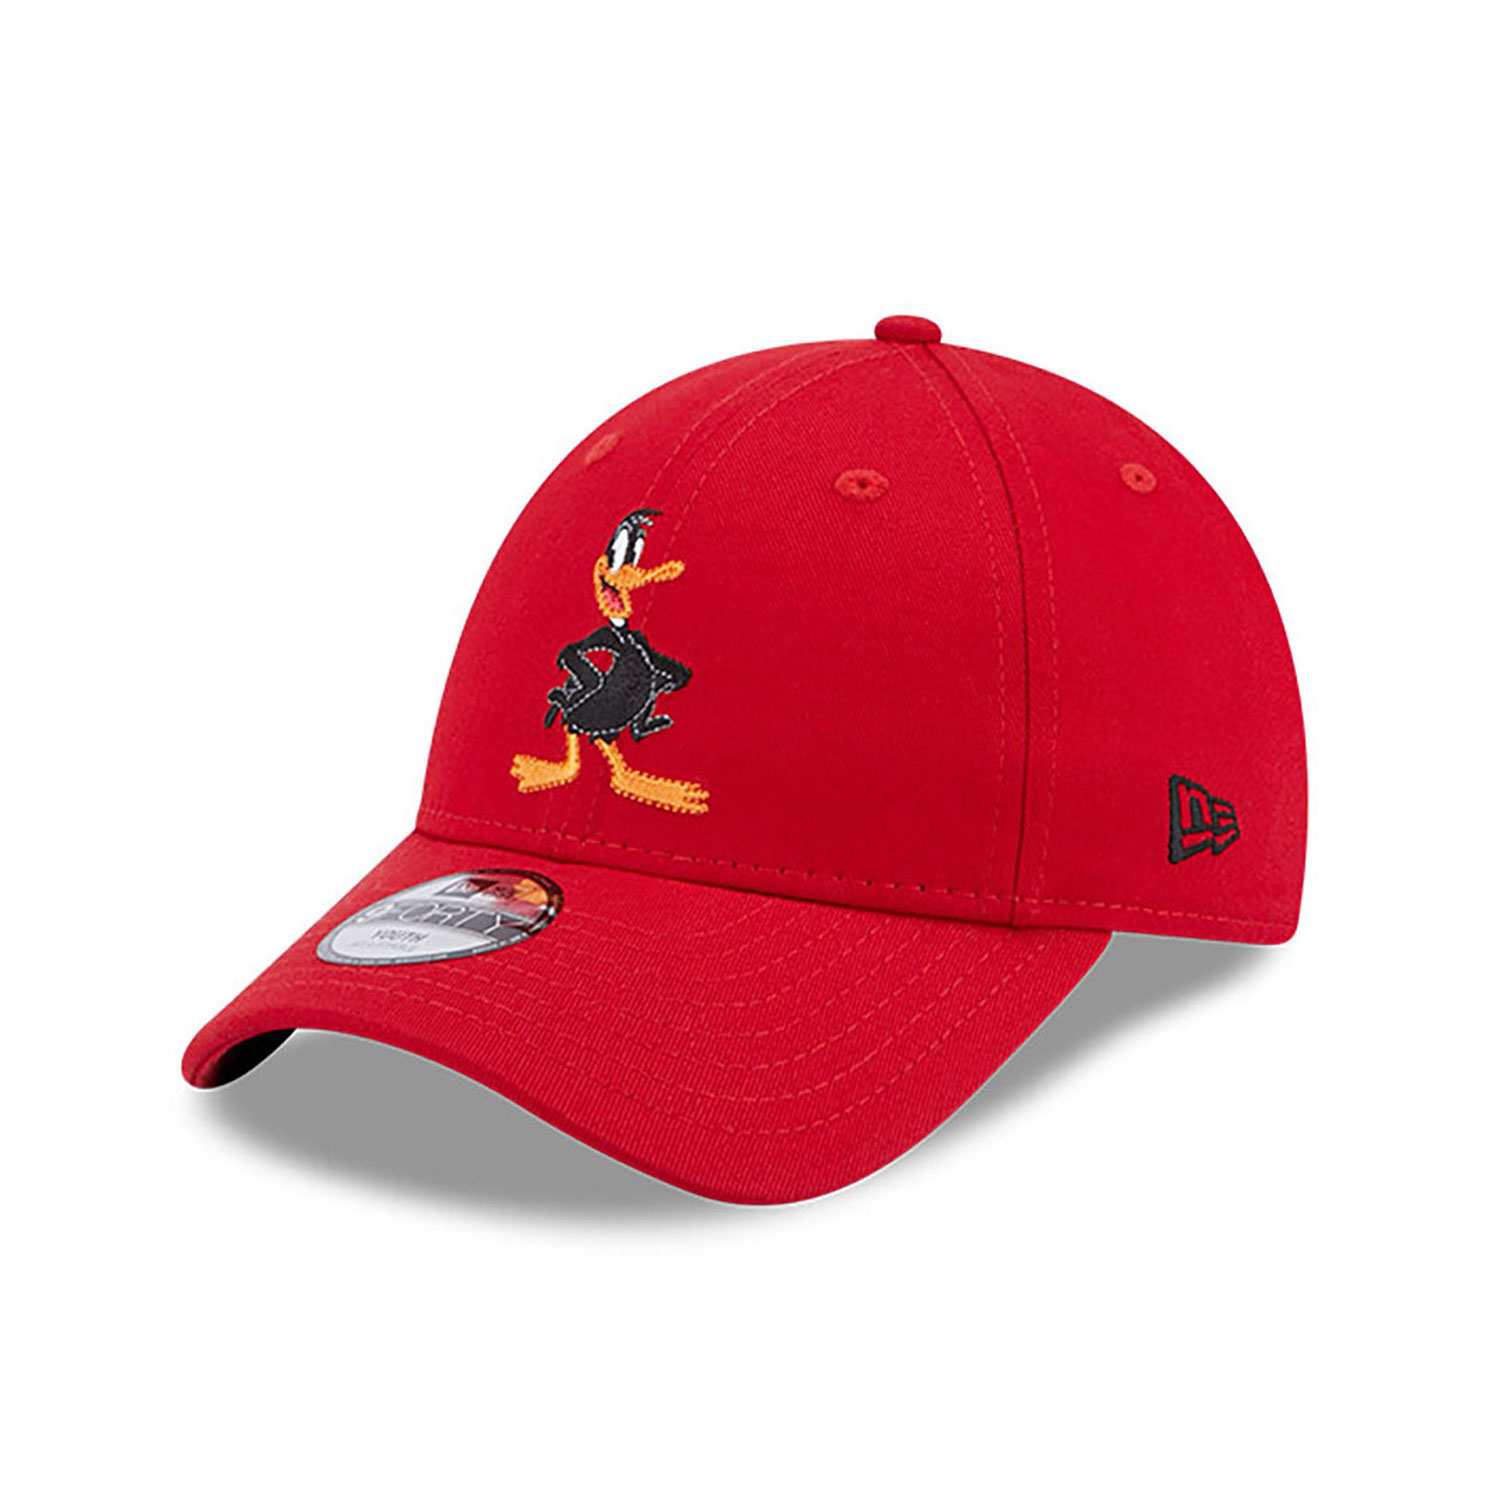 Warner Brothers Daffy Duck Red Youth 9FORTY Adjustable Cap